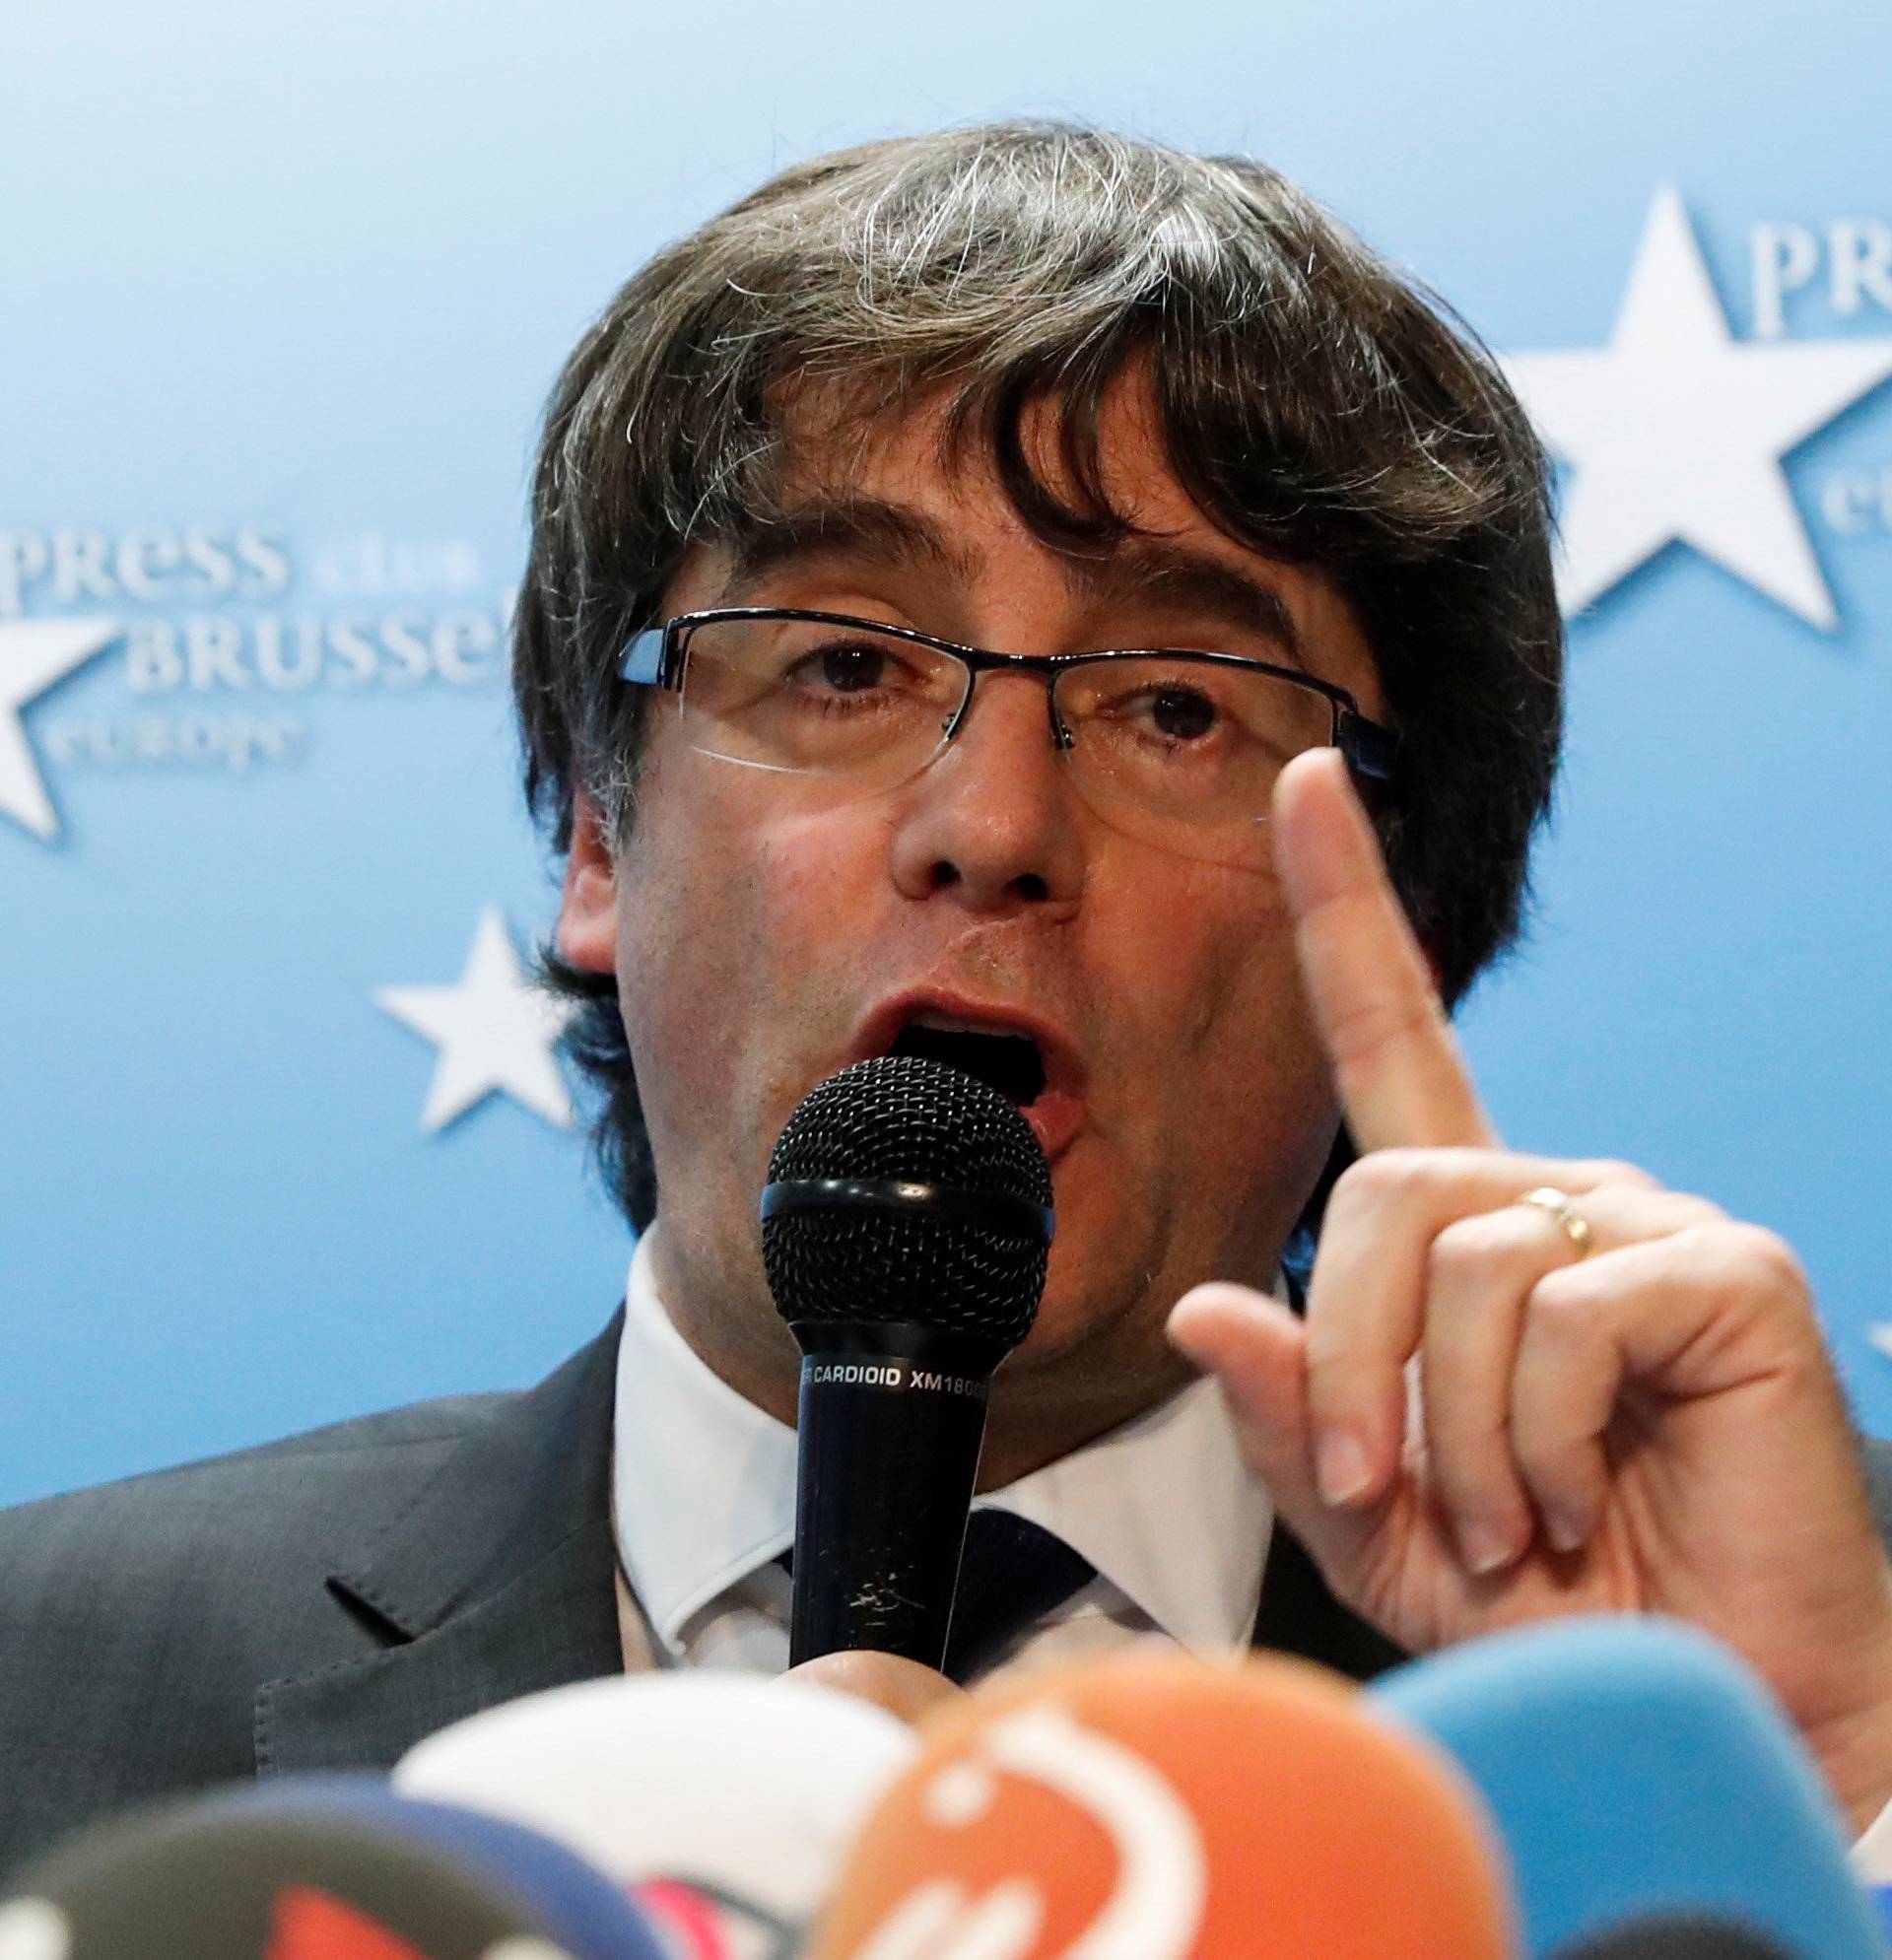 Sacked Catalan leader Carles Puigdemont attends a news conference at the Press Club Brussels Europe in Brussels